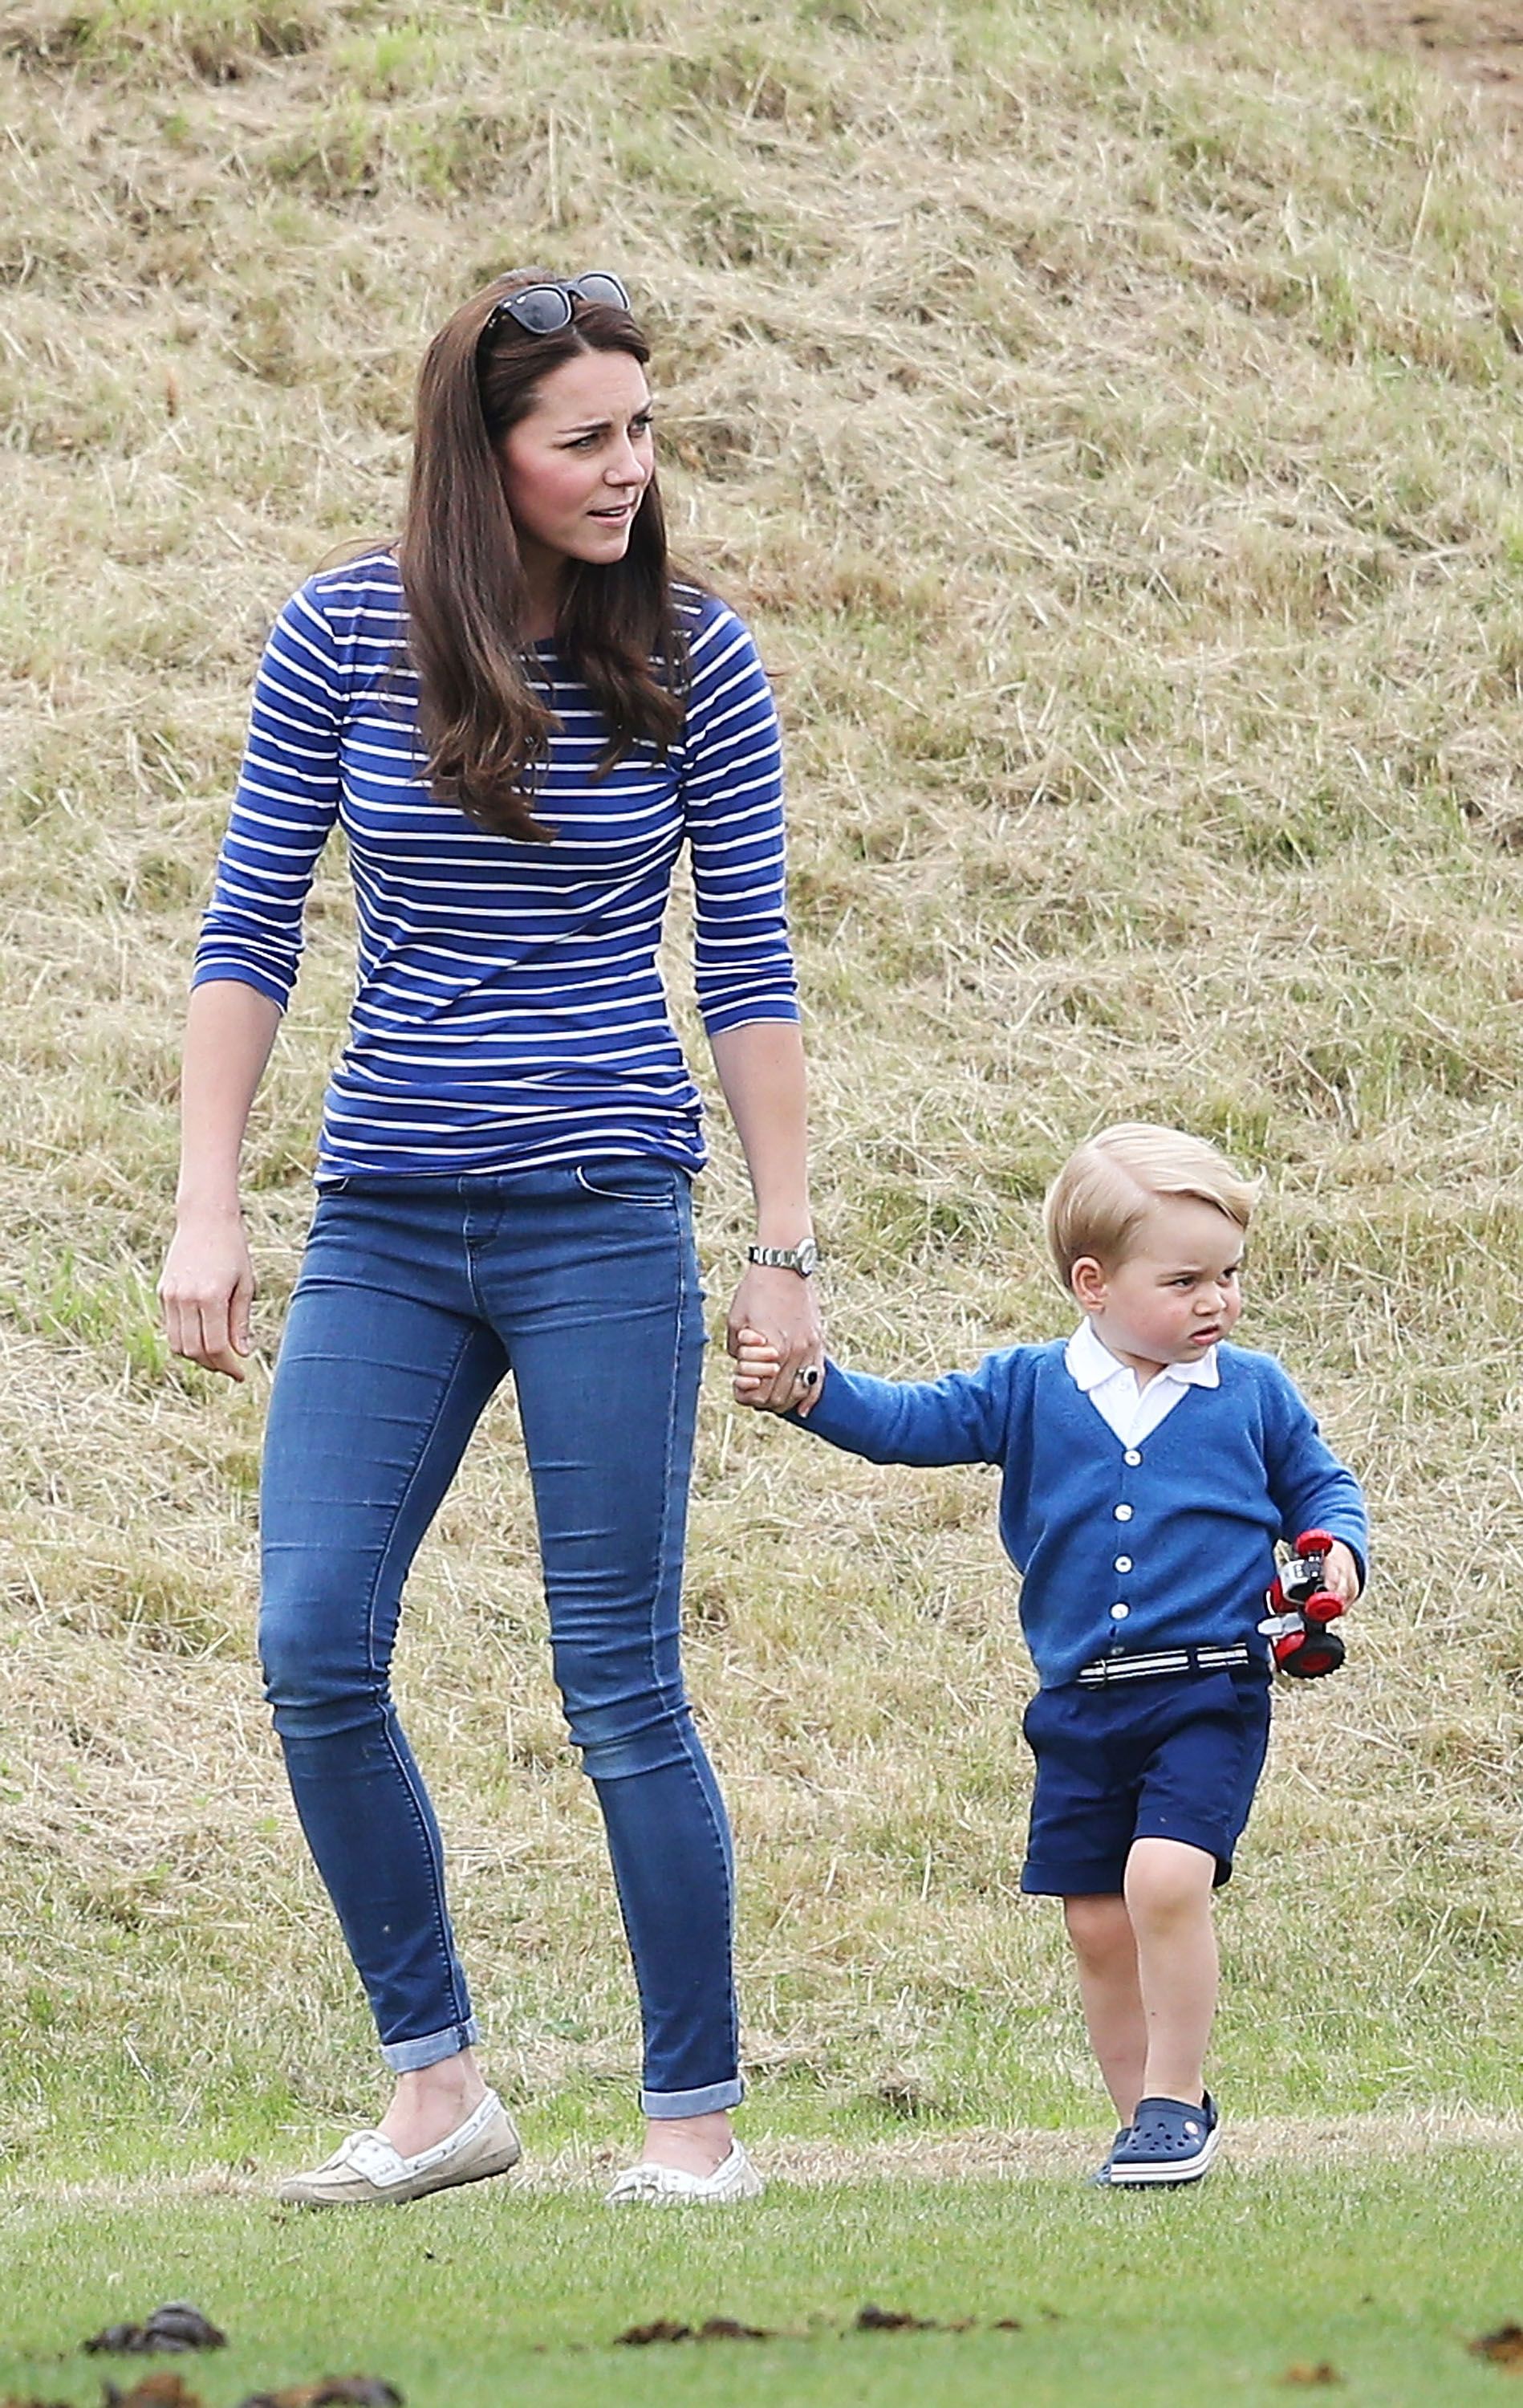 kate middleton and prince george